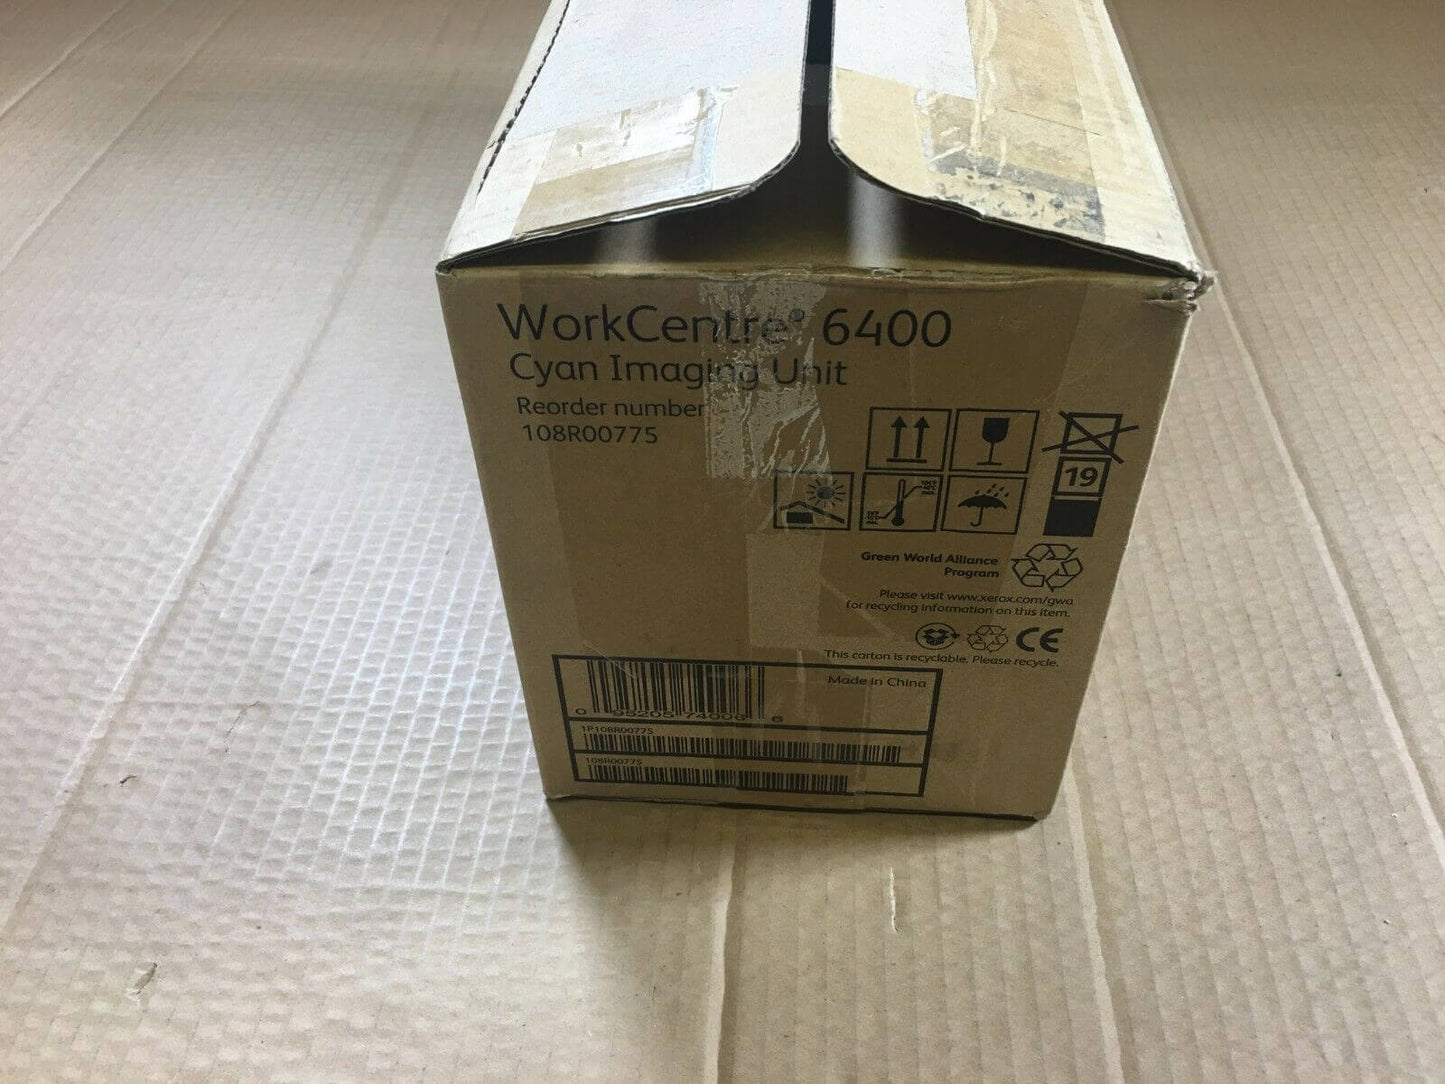 New Open Box Xerox WorkCentre 6400 Cyan Imaging Unit 108R00775 - Same Day Shipping - copier-clearance-center